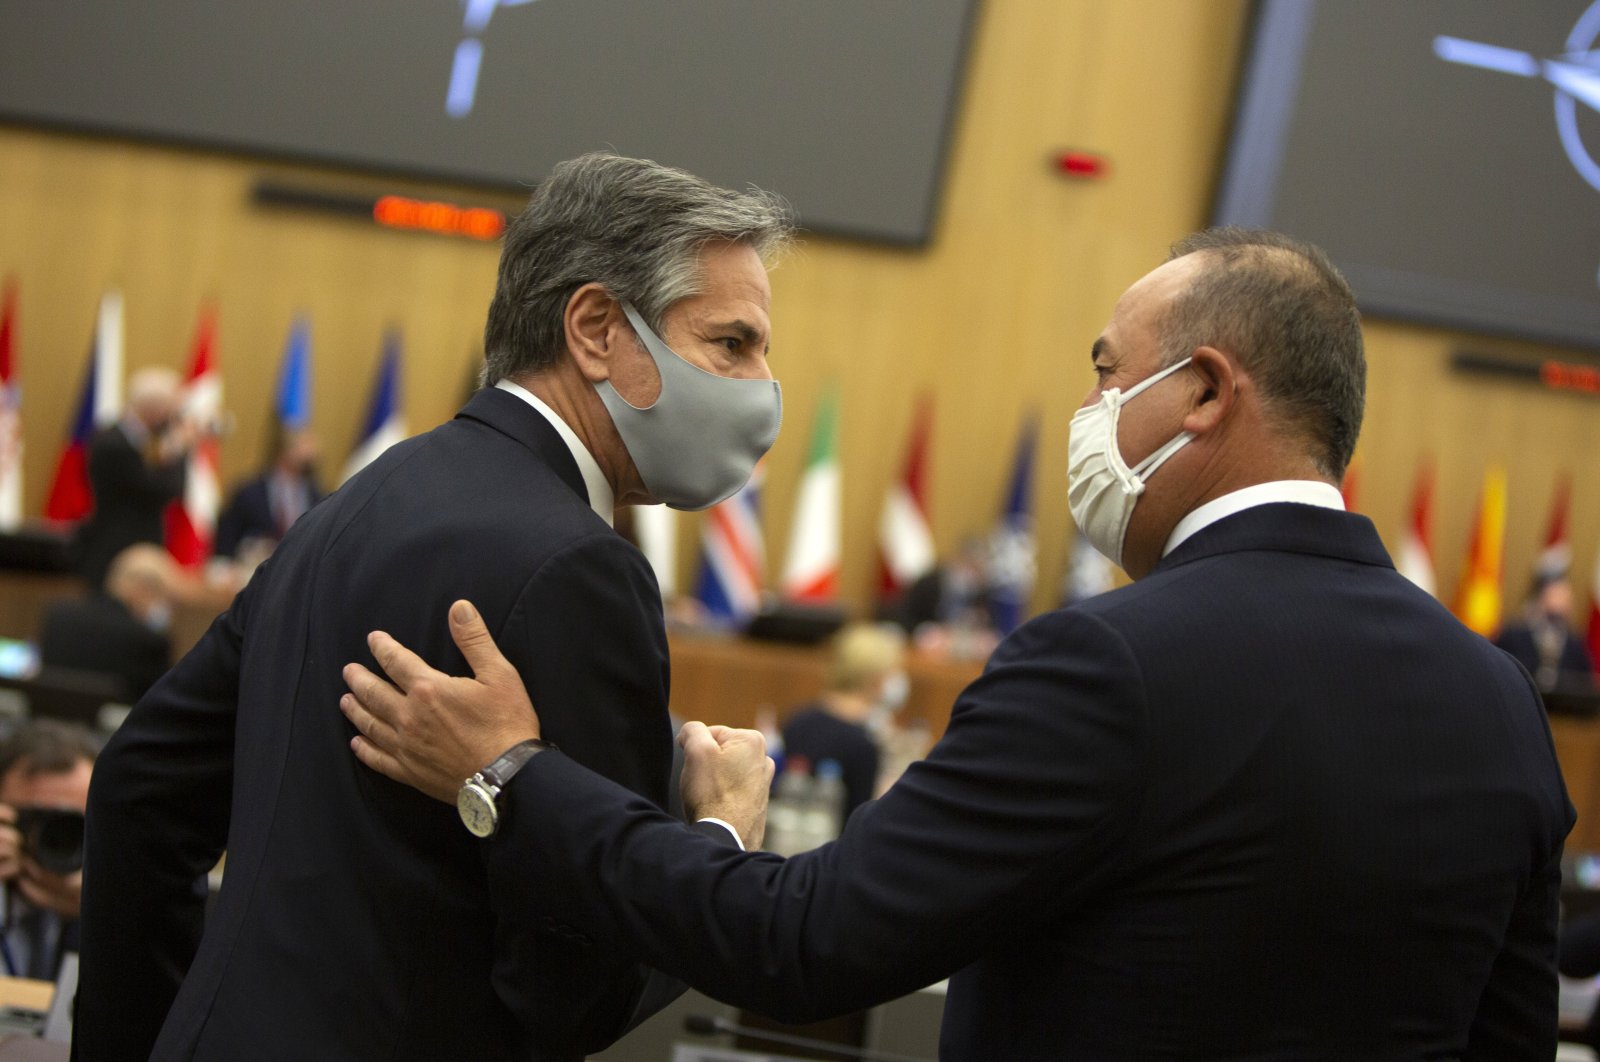 U.S. Secretary of State Antony Blinken (L) speaks with Turkey's Foreign Minister Mevlüt Çavuşoğlu during a meeting of NATO foreign ministers at NATO headquarters in Brussels, Belgium, March 23, 2021. (AP Photo)